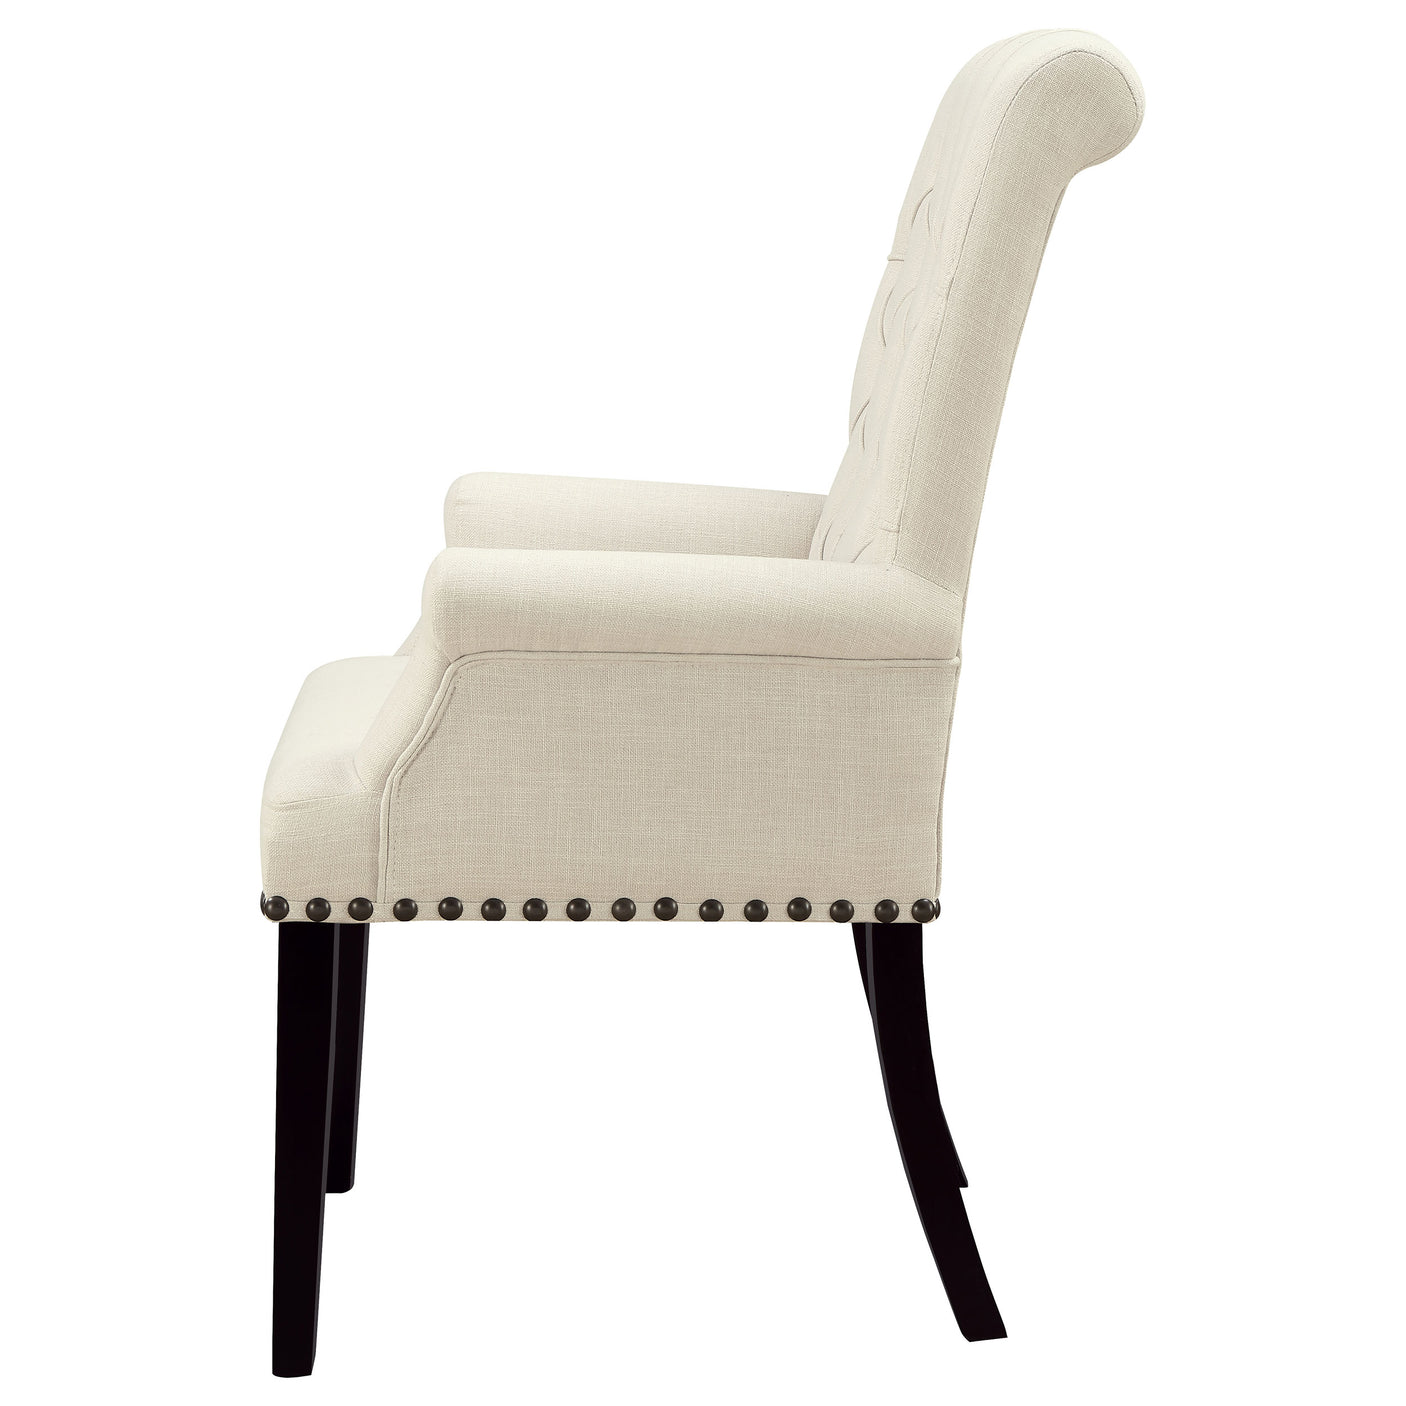 Arm Chair - Alana Tufted Back Upholstered Arm Chair Beige